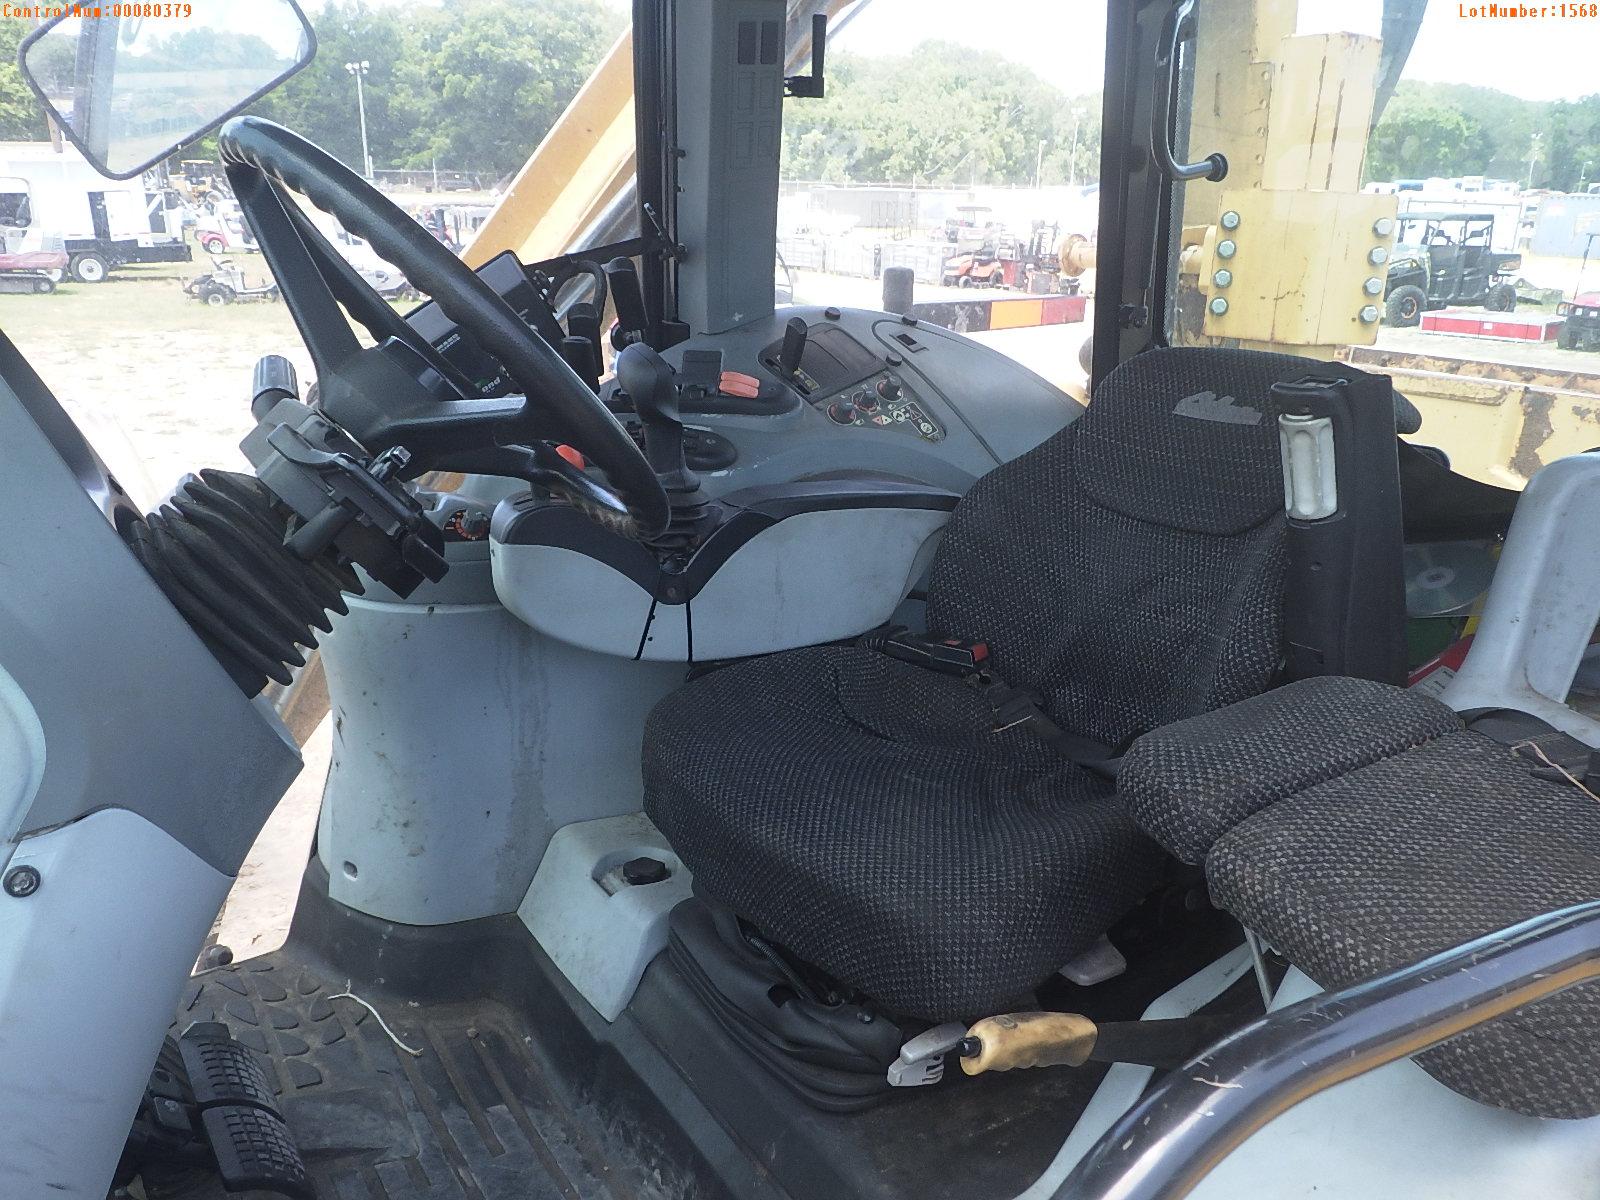 5-01568 (Equip.-Tractor)  Seller:Private/Dealer CHALLENGER MT535B CAB TRACTOR WI